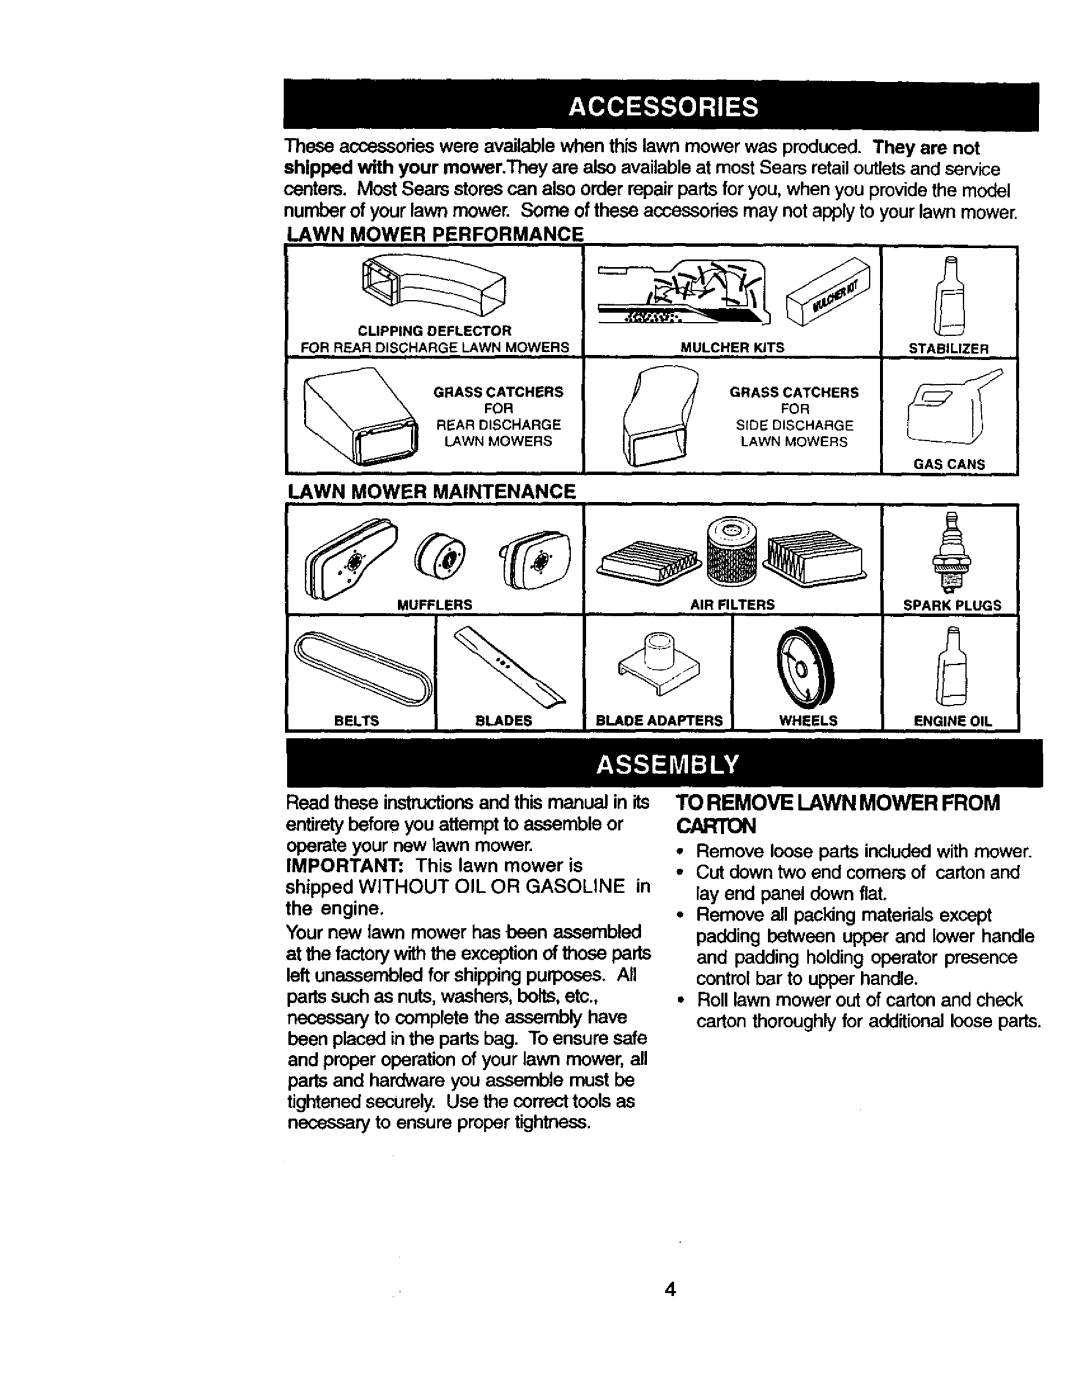 Craftsman 917.377544 owner manual To Remove Lawn Mower From Carton, Lawn Mower Maintenance 